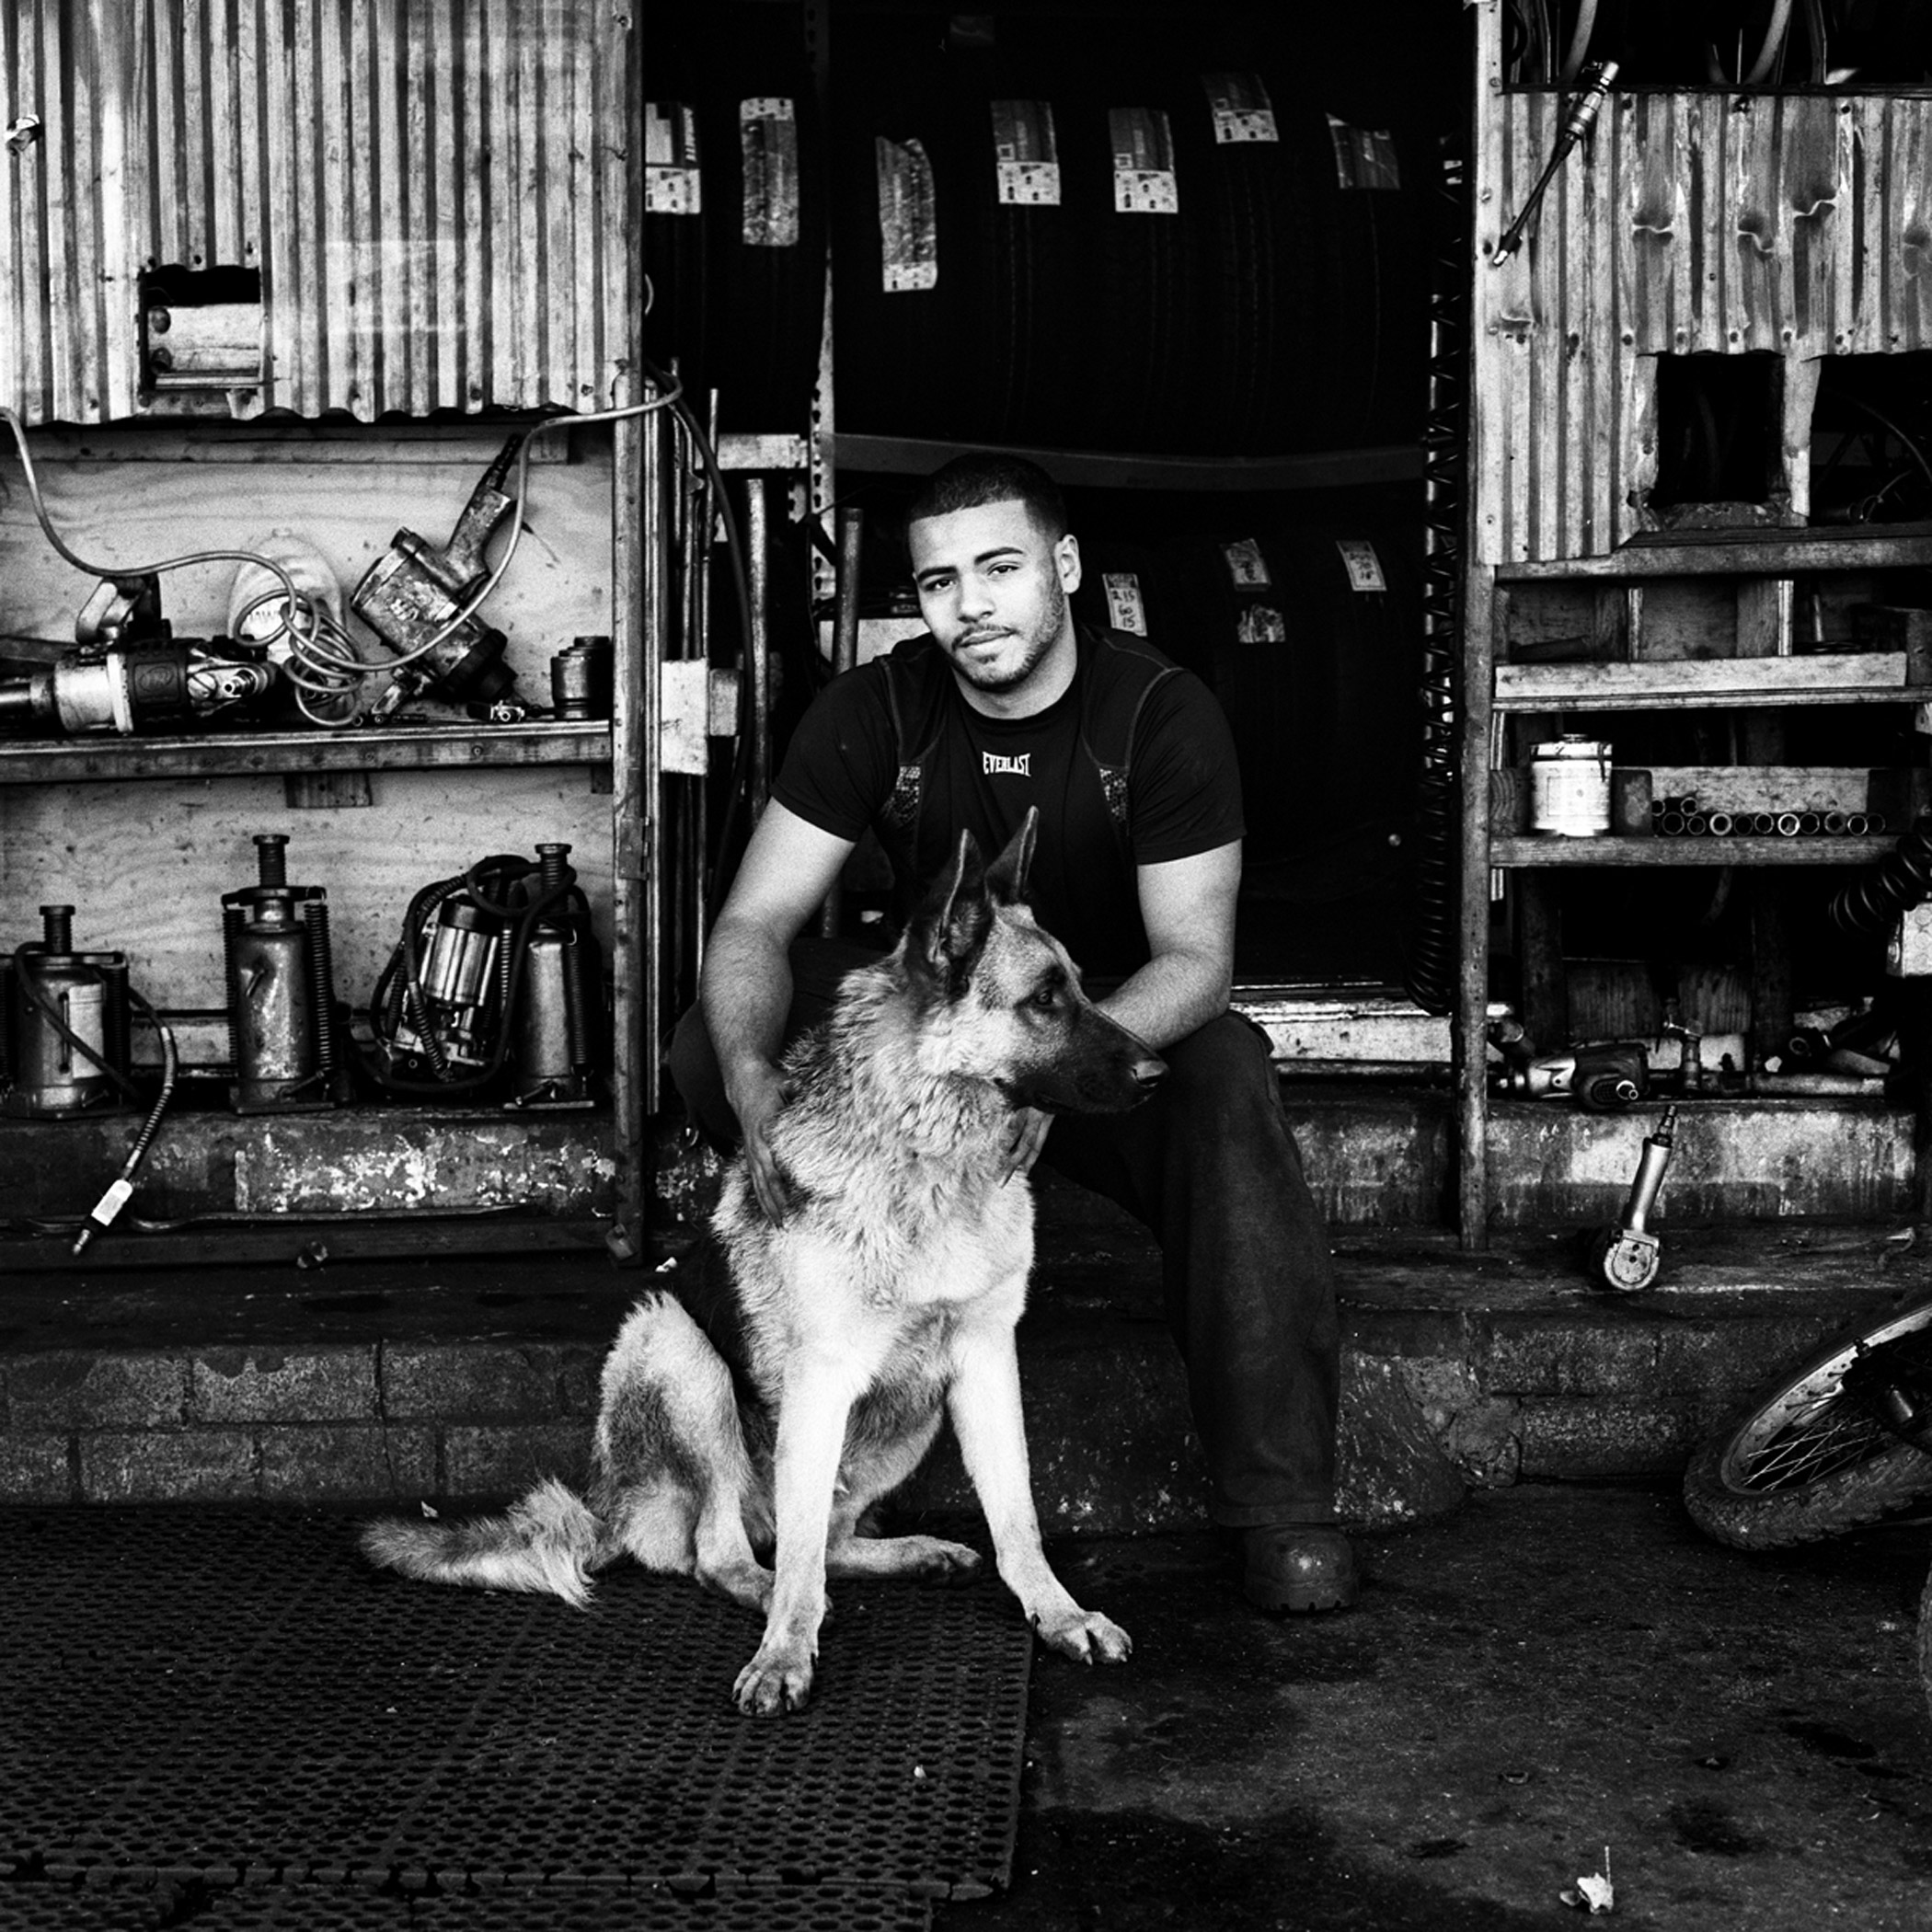 Anthony and his dog Riley at the entrance to their tire shop, P&amp;J Tire Shop, on Metropolitan Avenue in Bushwick, Brooklyn, N.Y., November 2015.